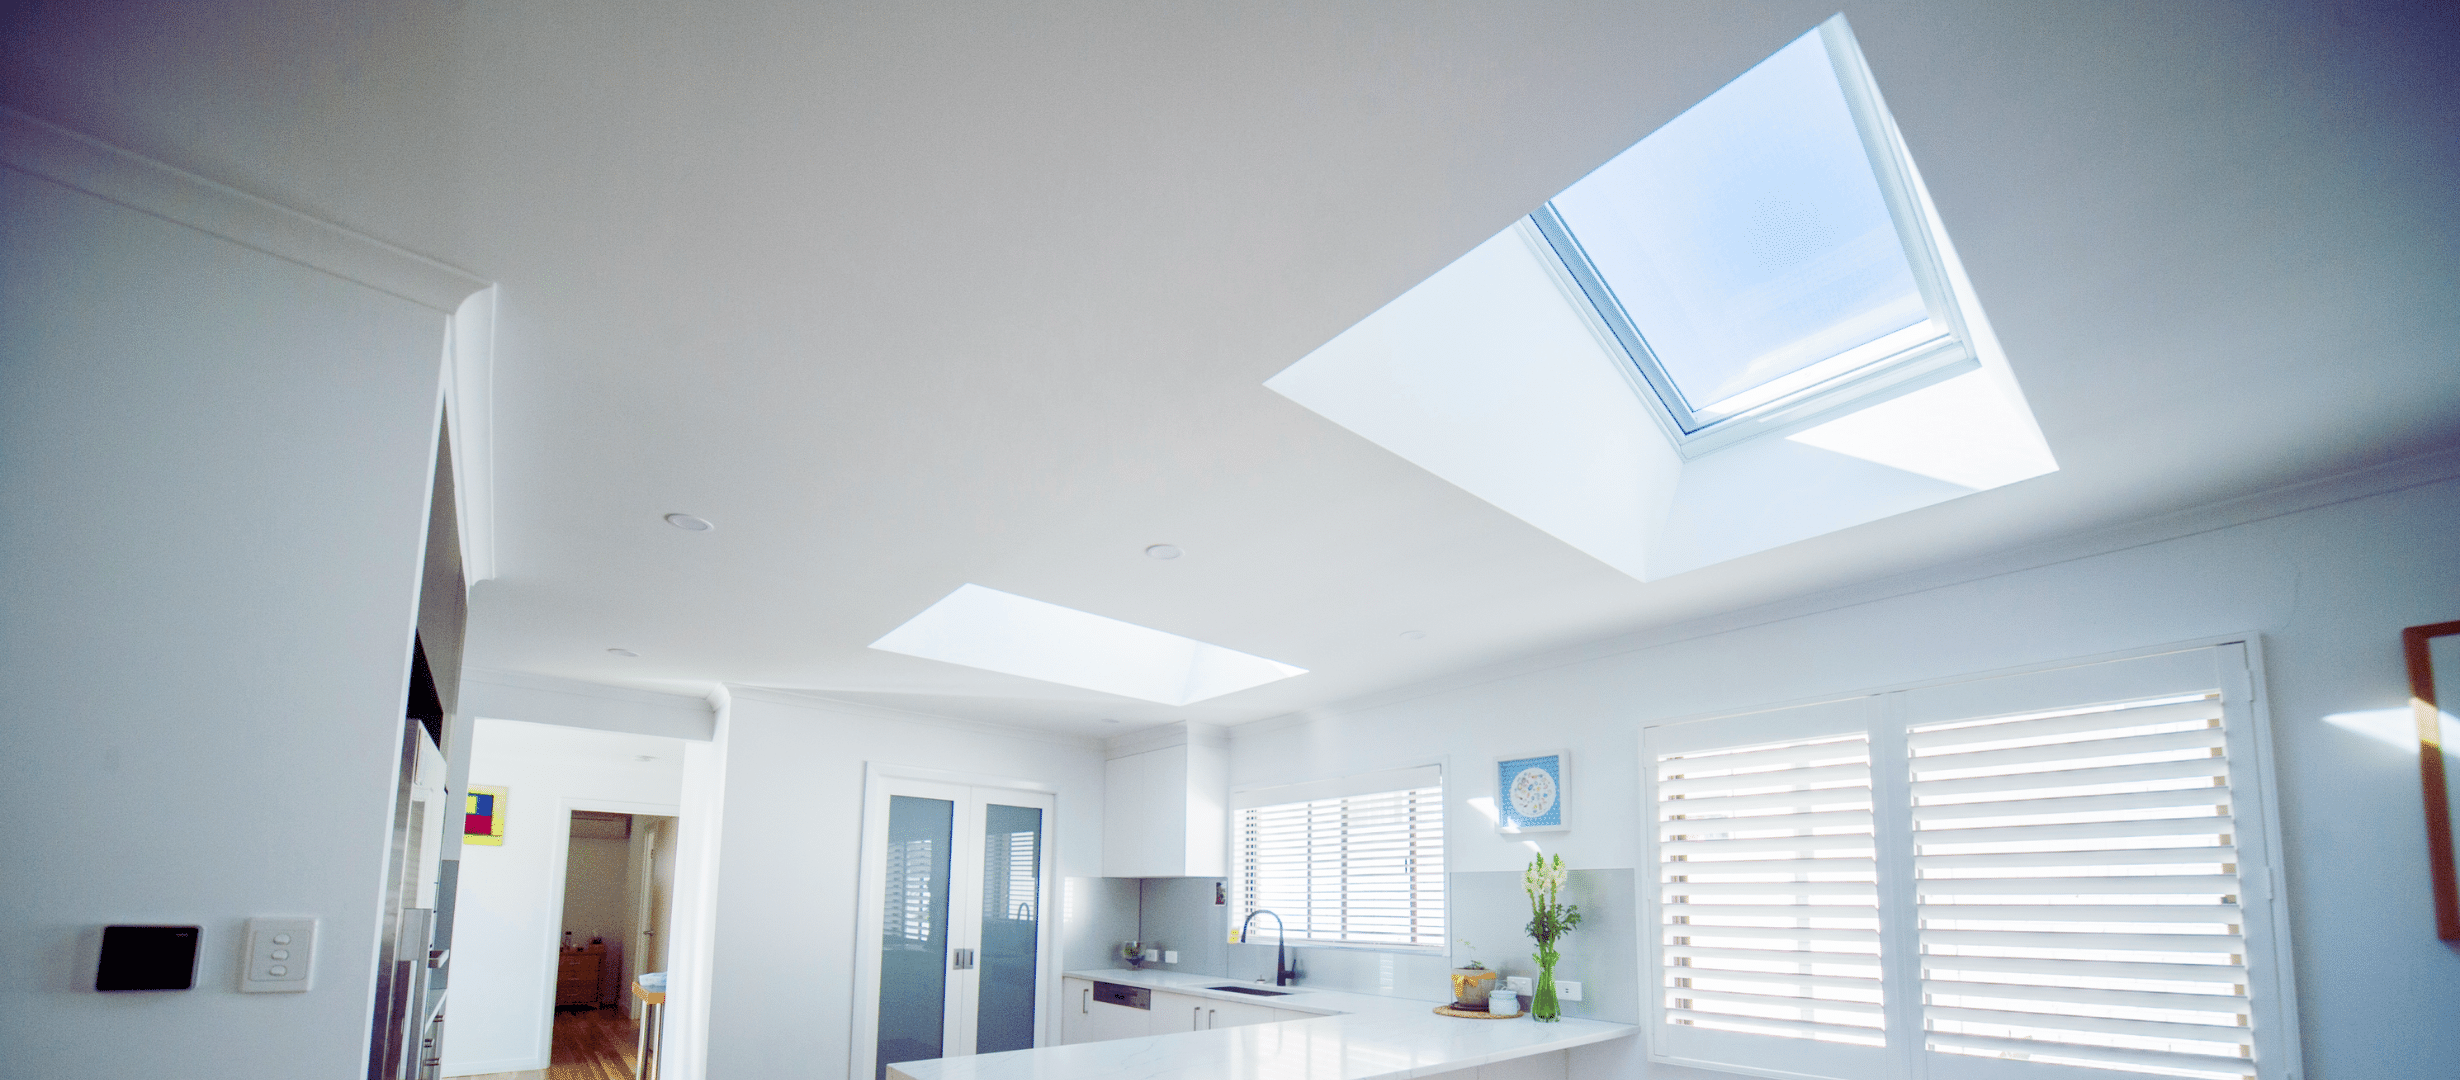 KWR - Choosing VELUX skylights to fit your home